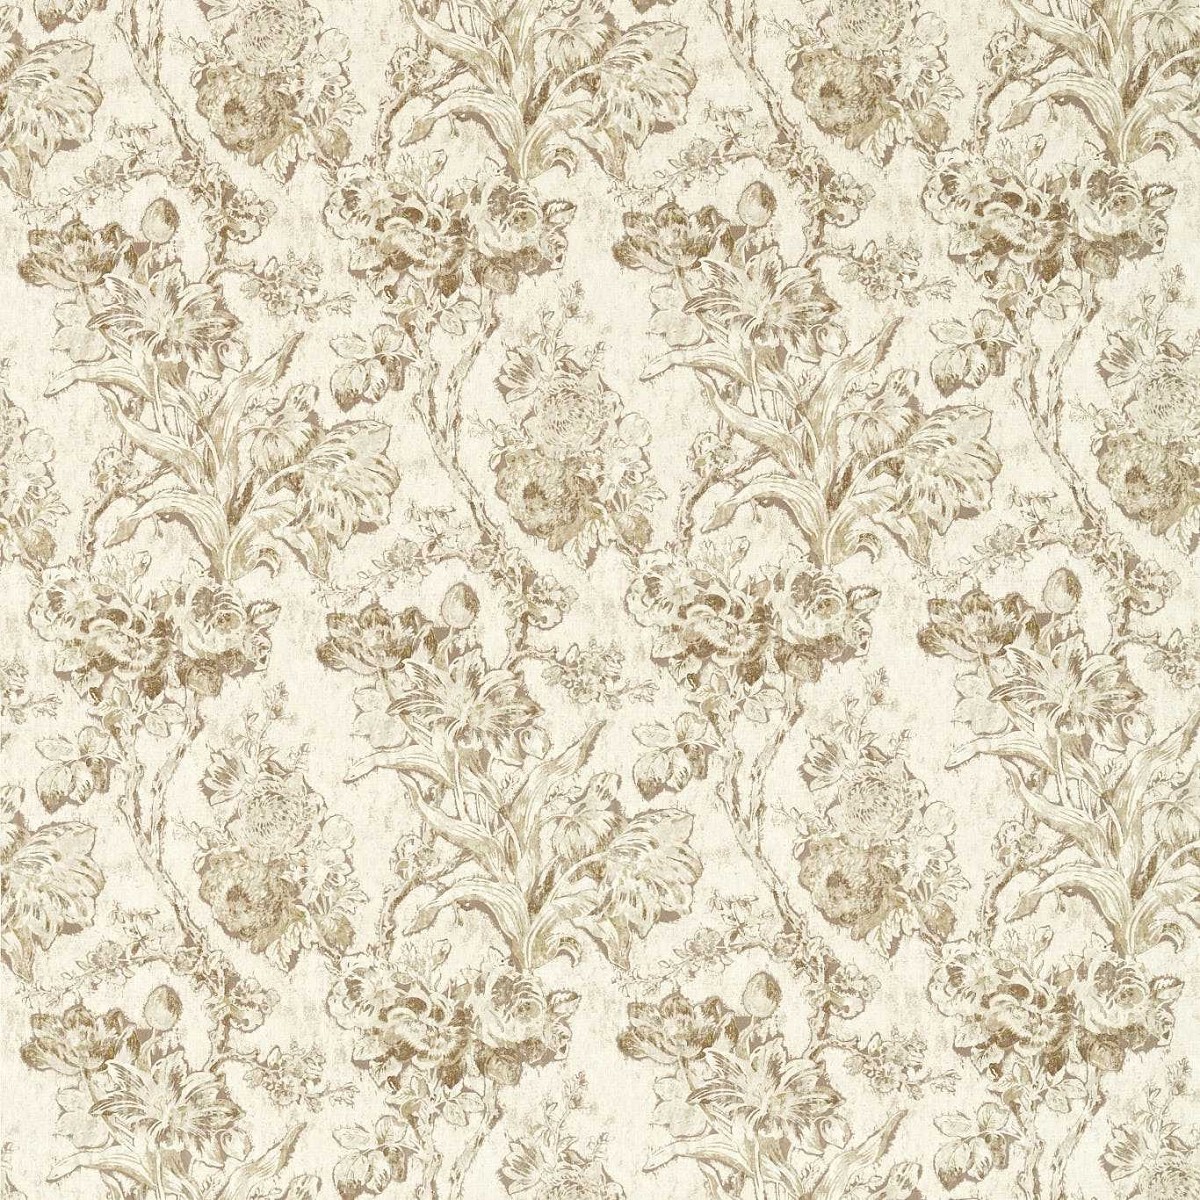 Fringed Tulip Toile Jute Fabric by Sanderson